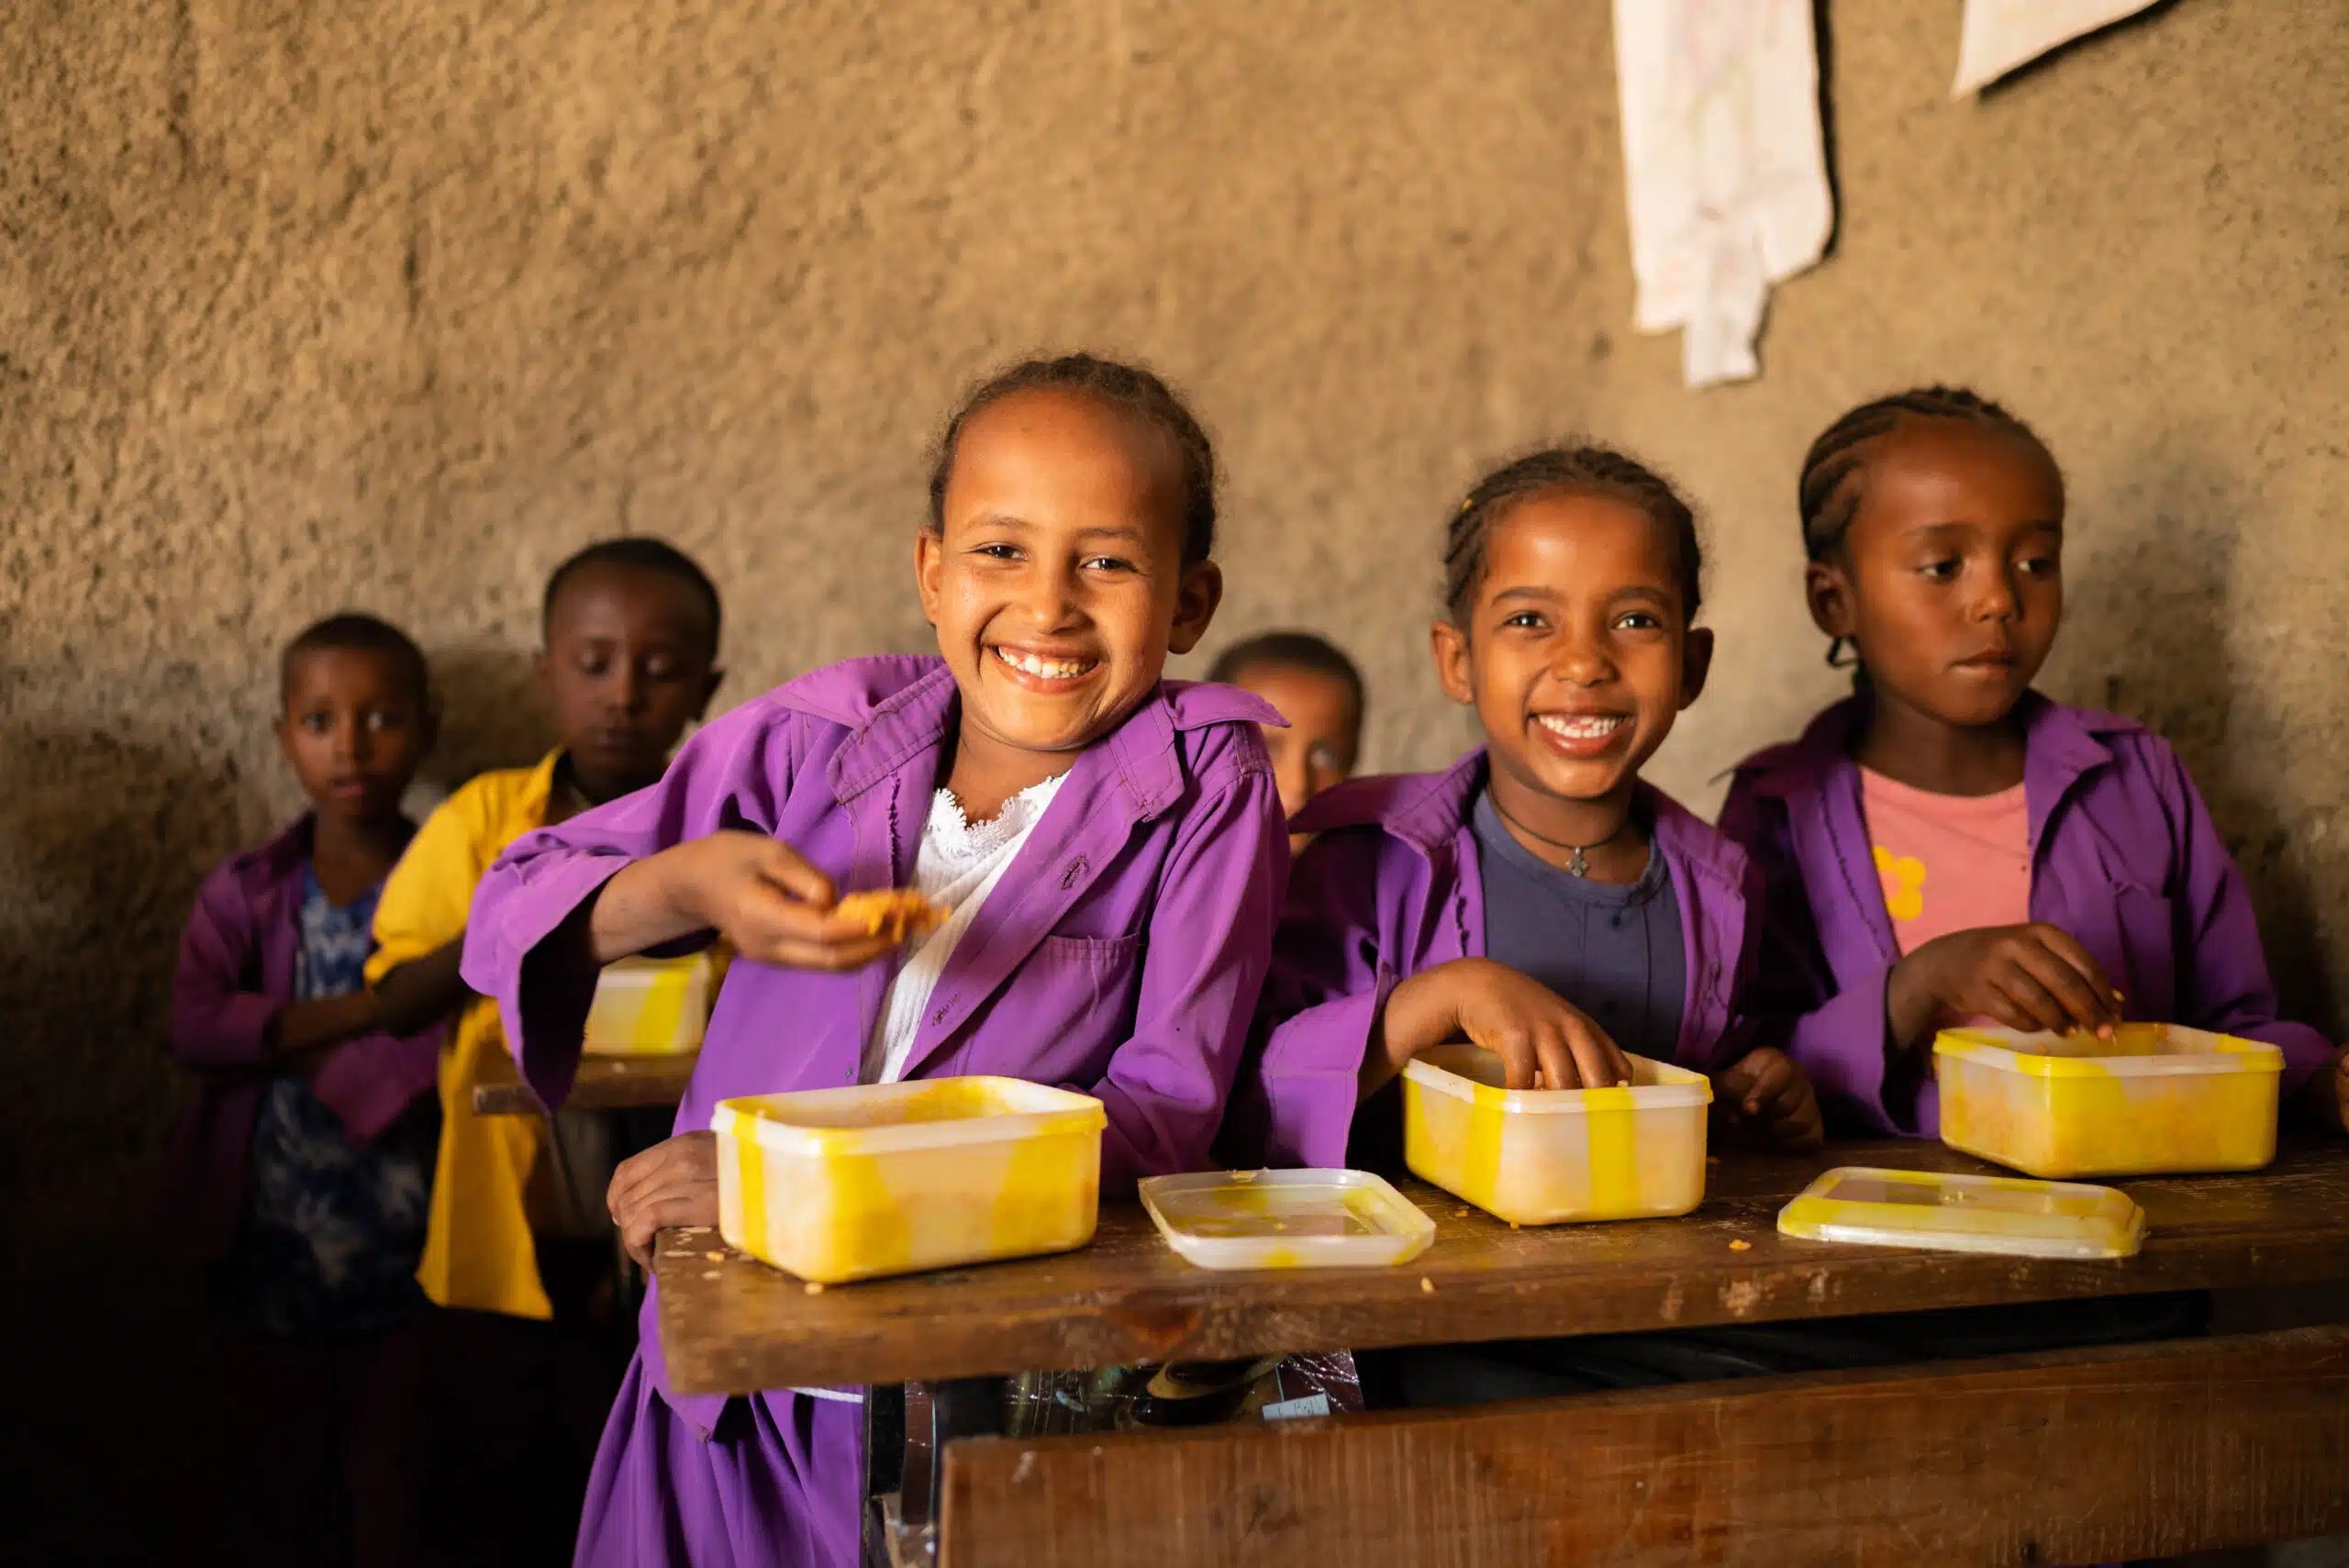 Children smiling at school with their lunchboxes